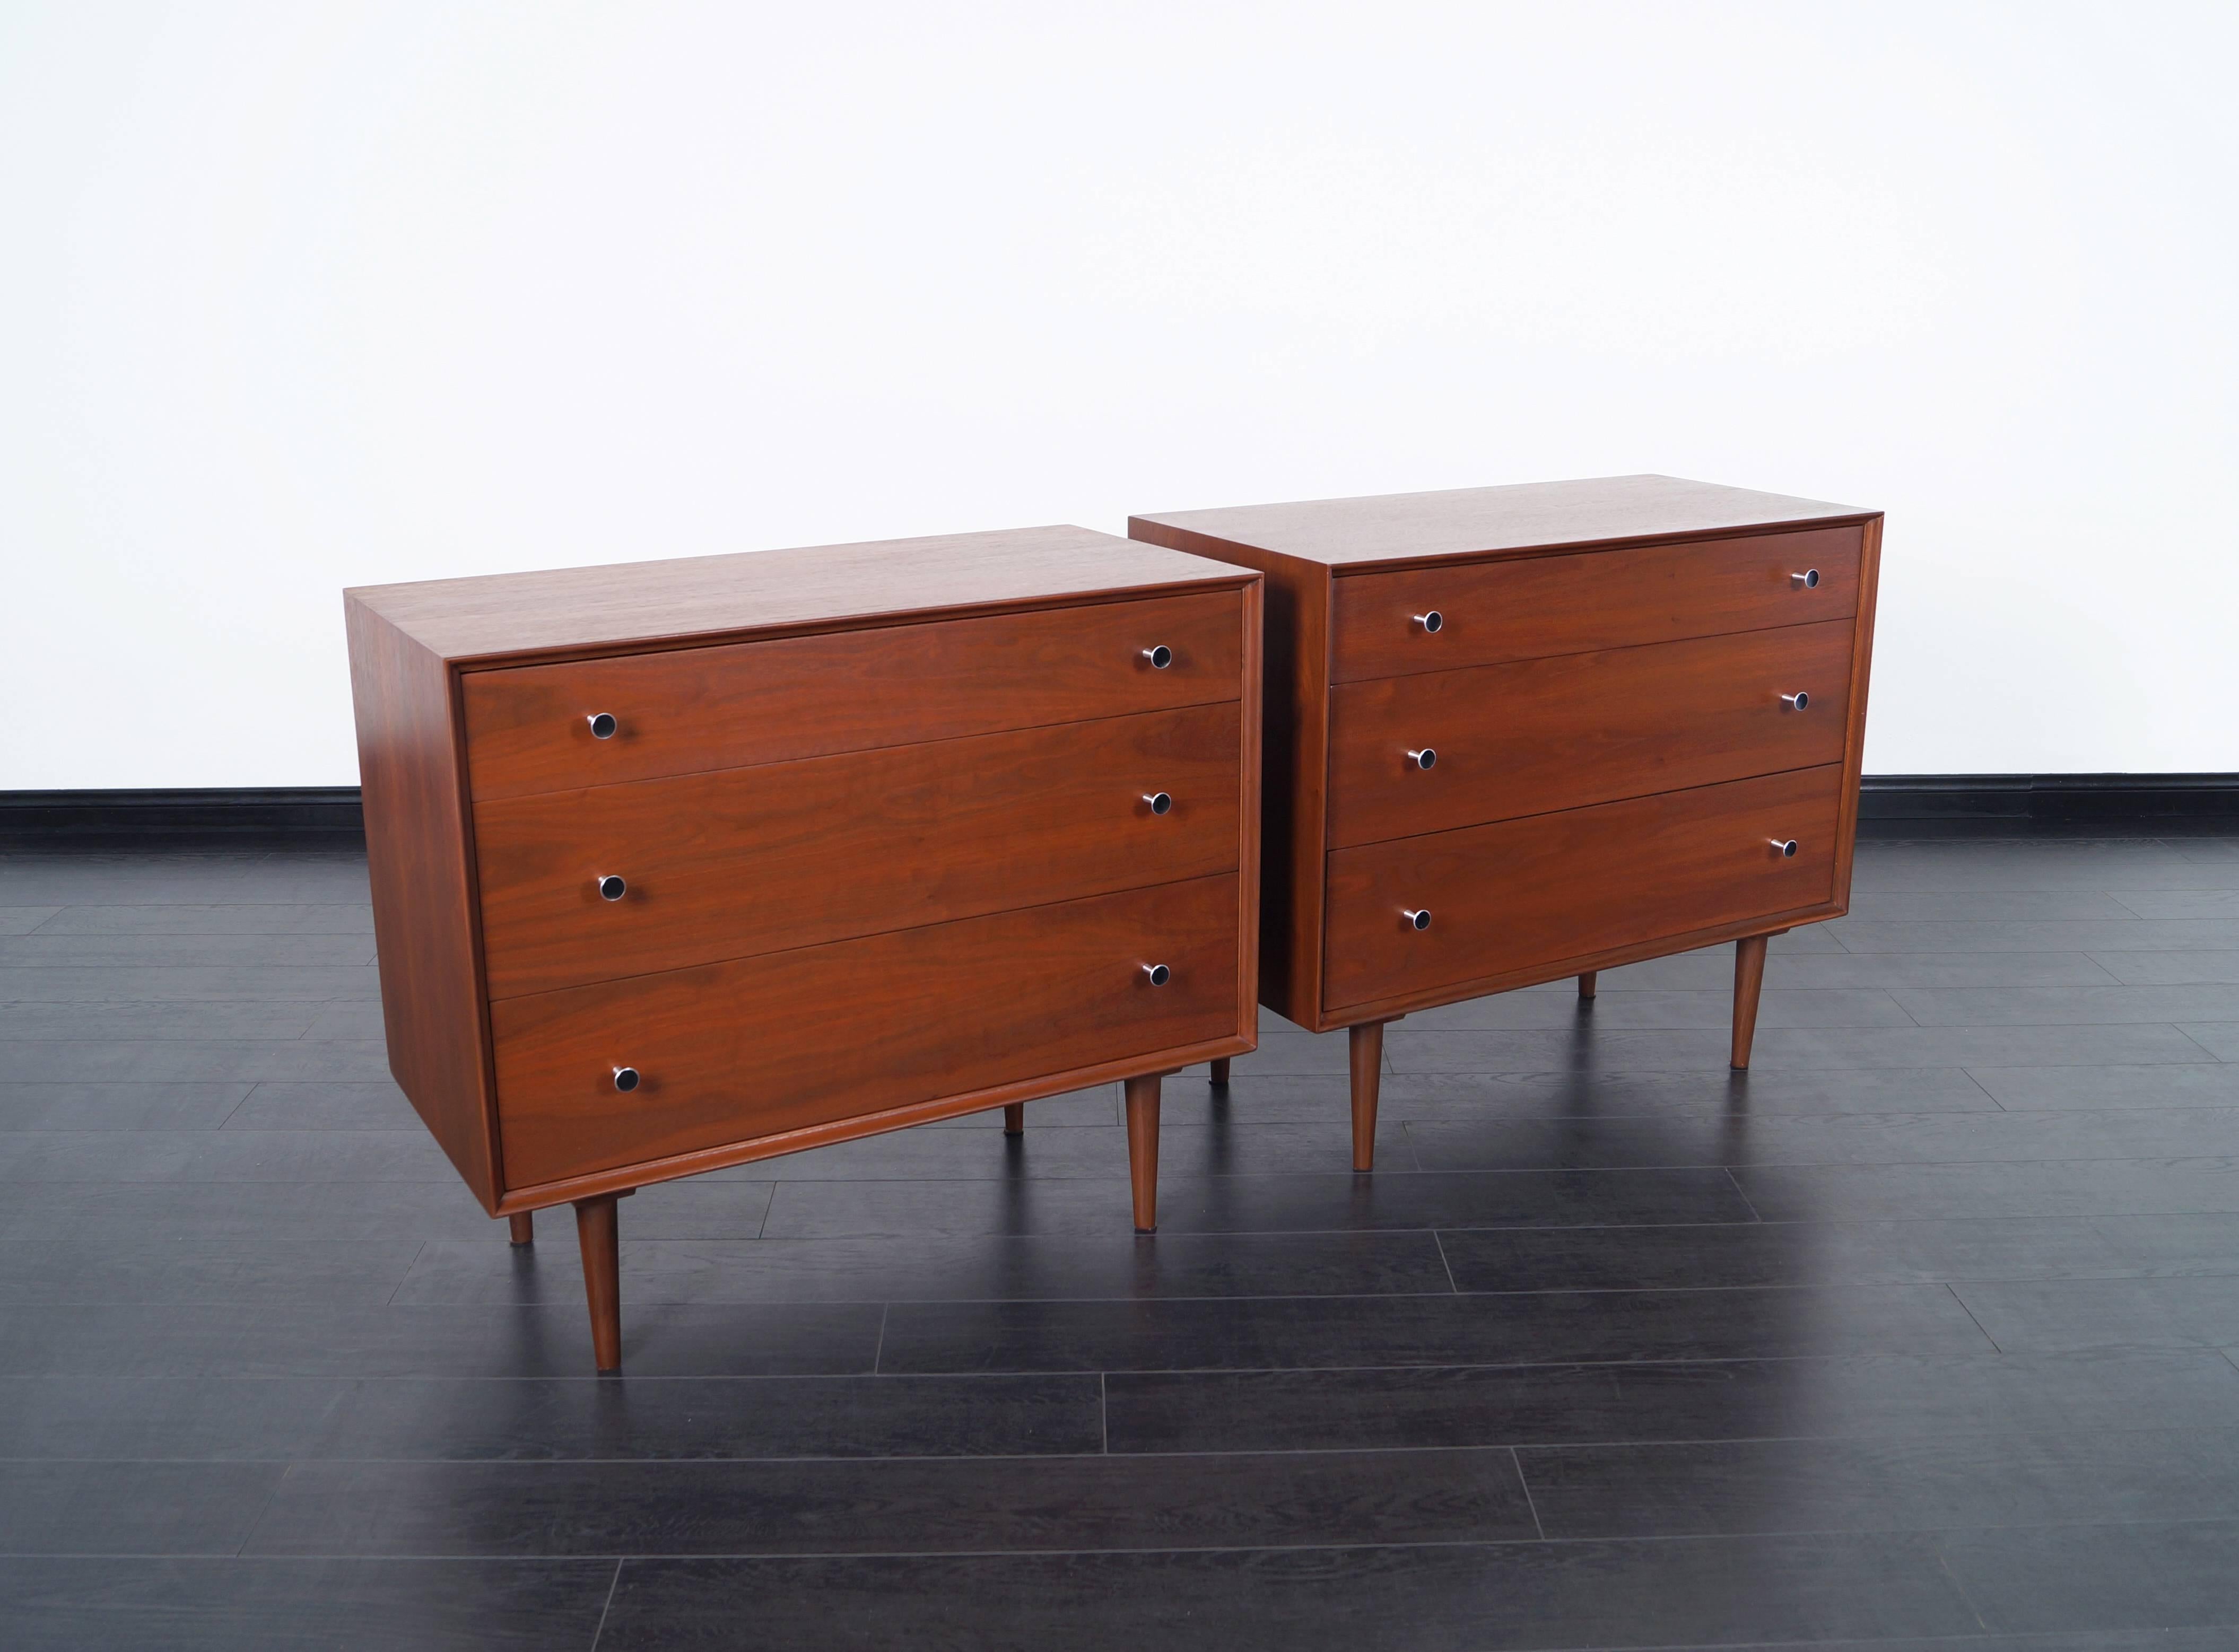 A wonderful pair of vintage chest of drawers designed by Robert Baron for Glenn of California. Each chest has three drawers with original aluminum pulls.